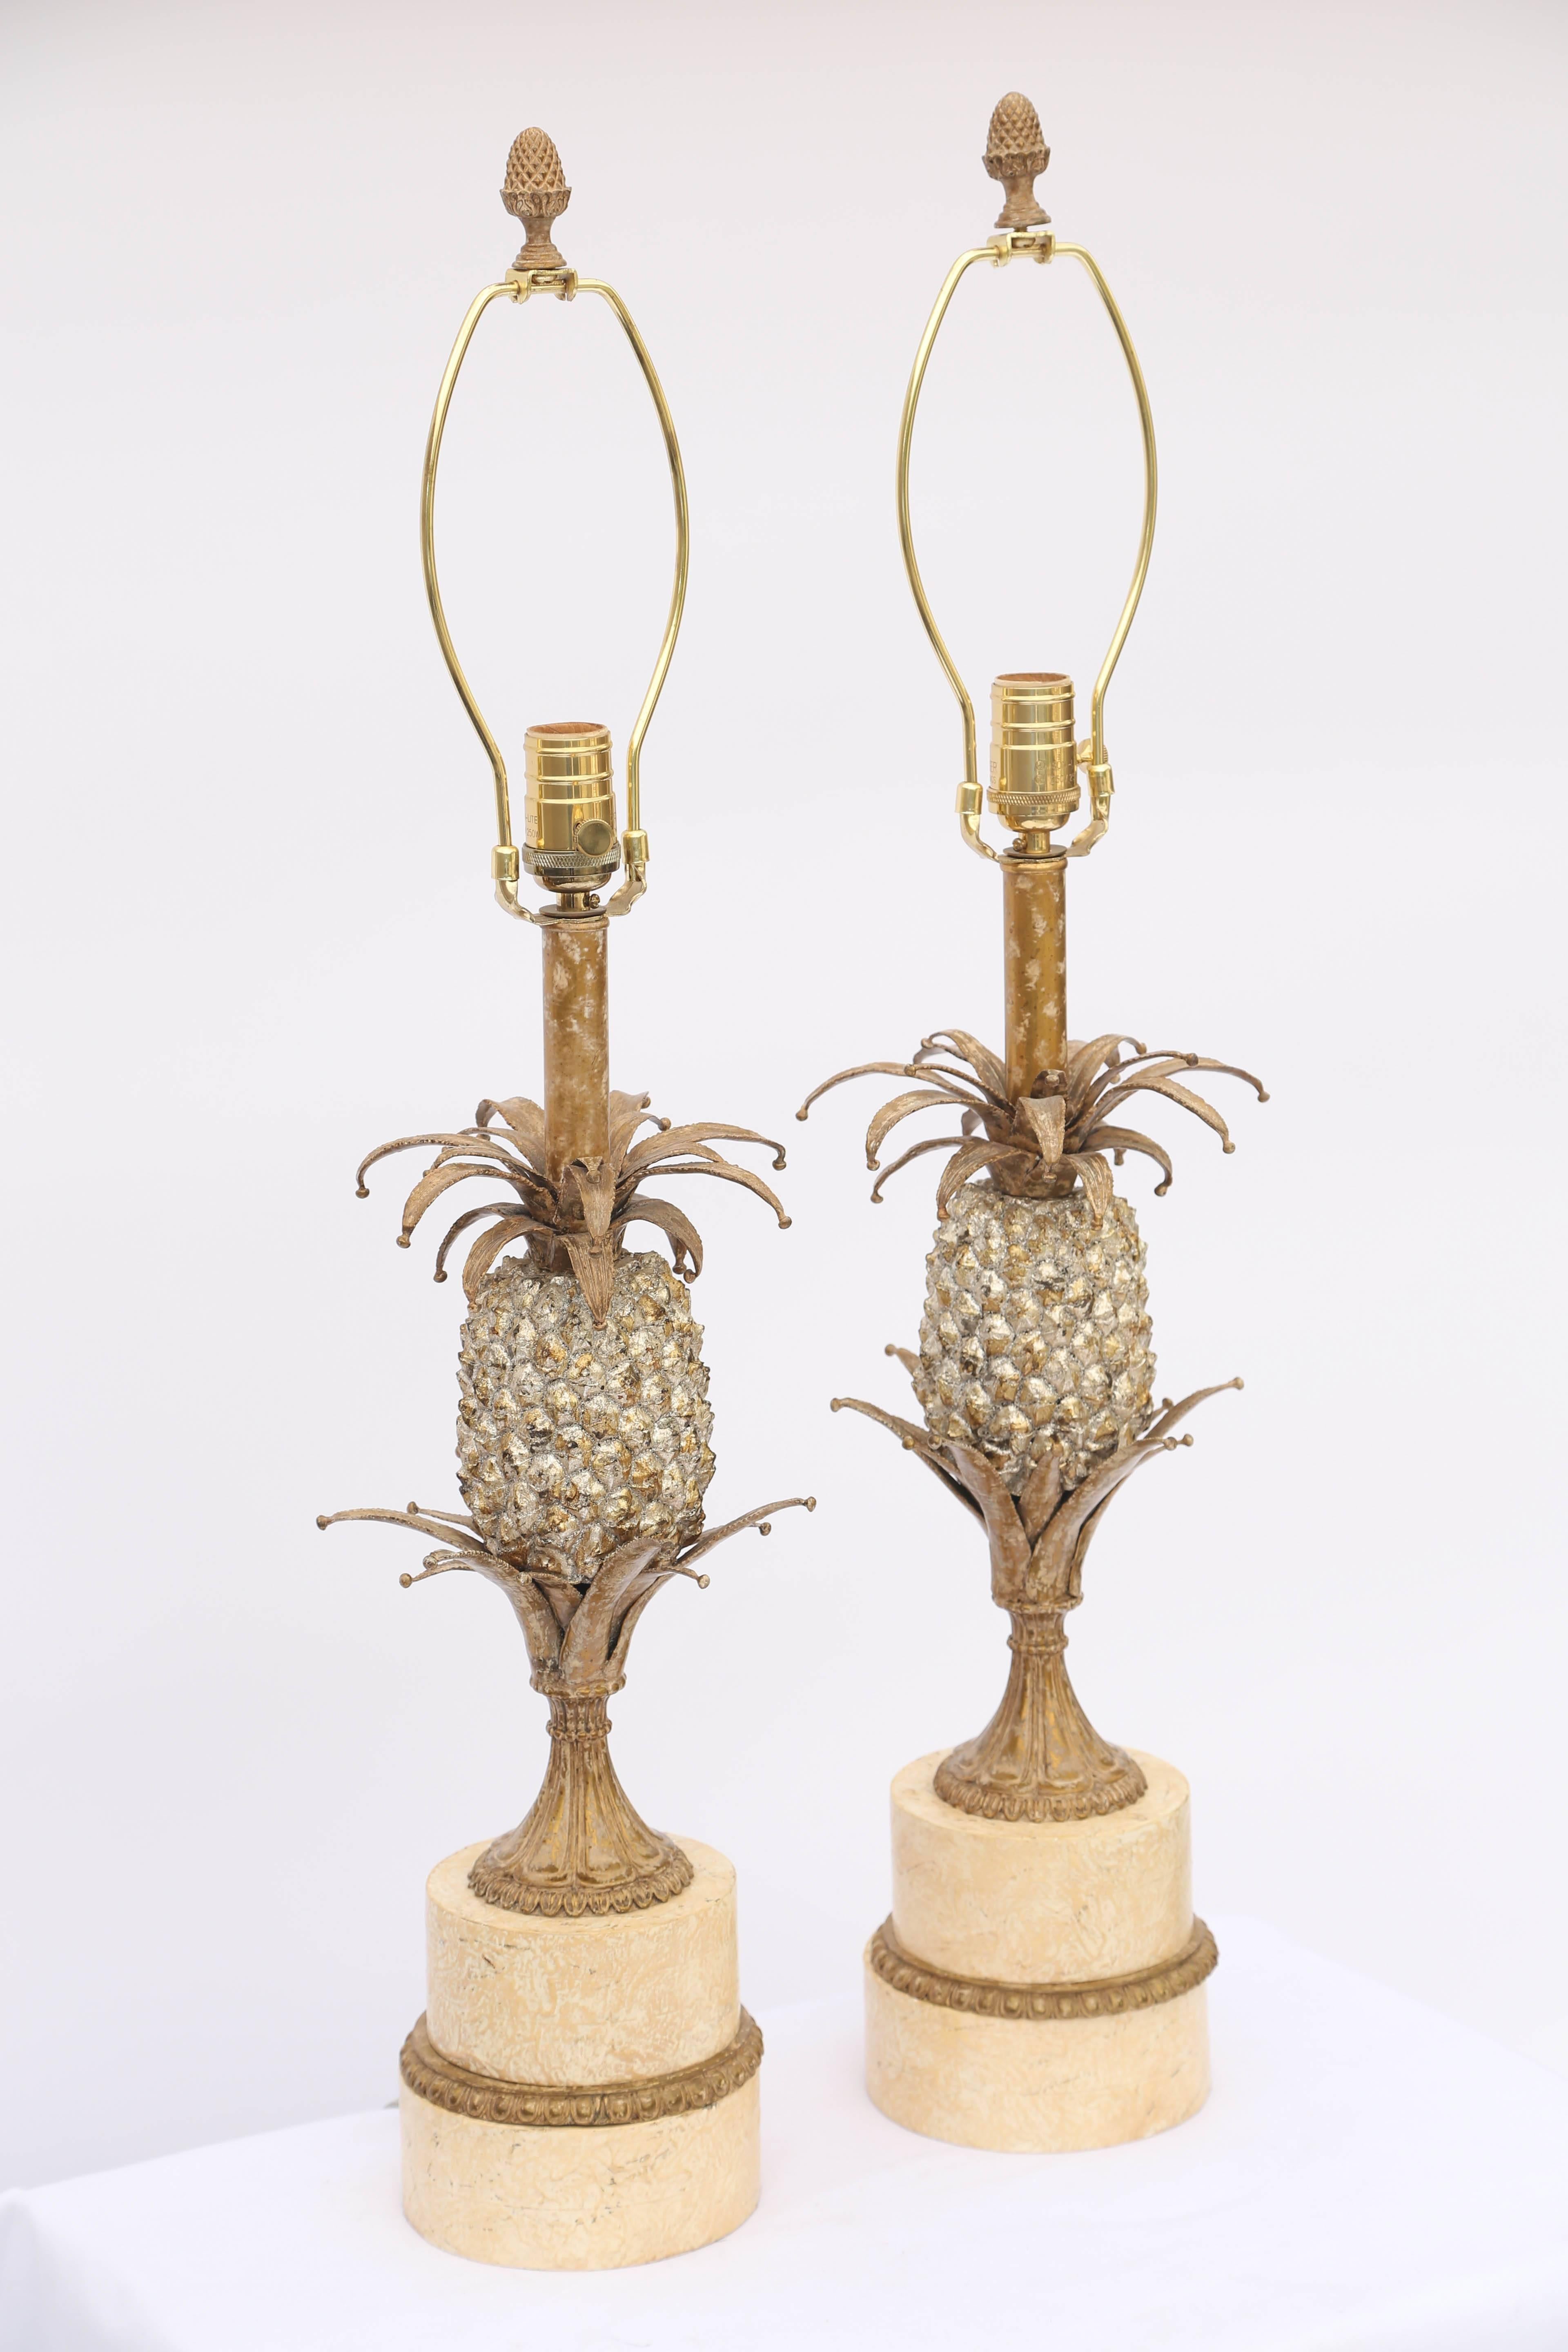 Pair of lamps, each fashioned as a pineapple, of metal with silver and gold gilt, set upon round, graduating plinth.

Stock ID: 7856.